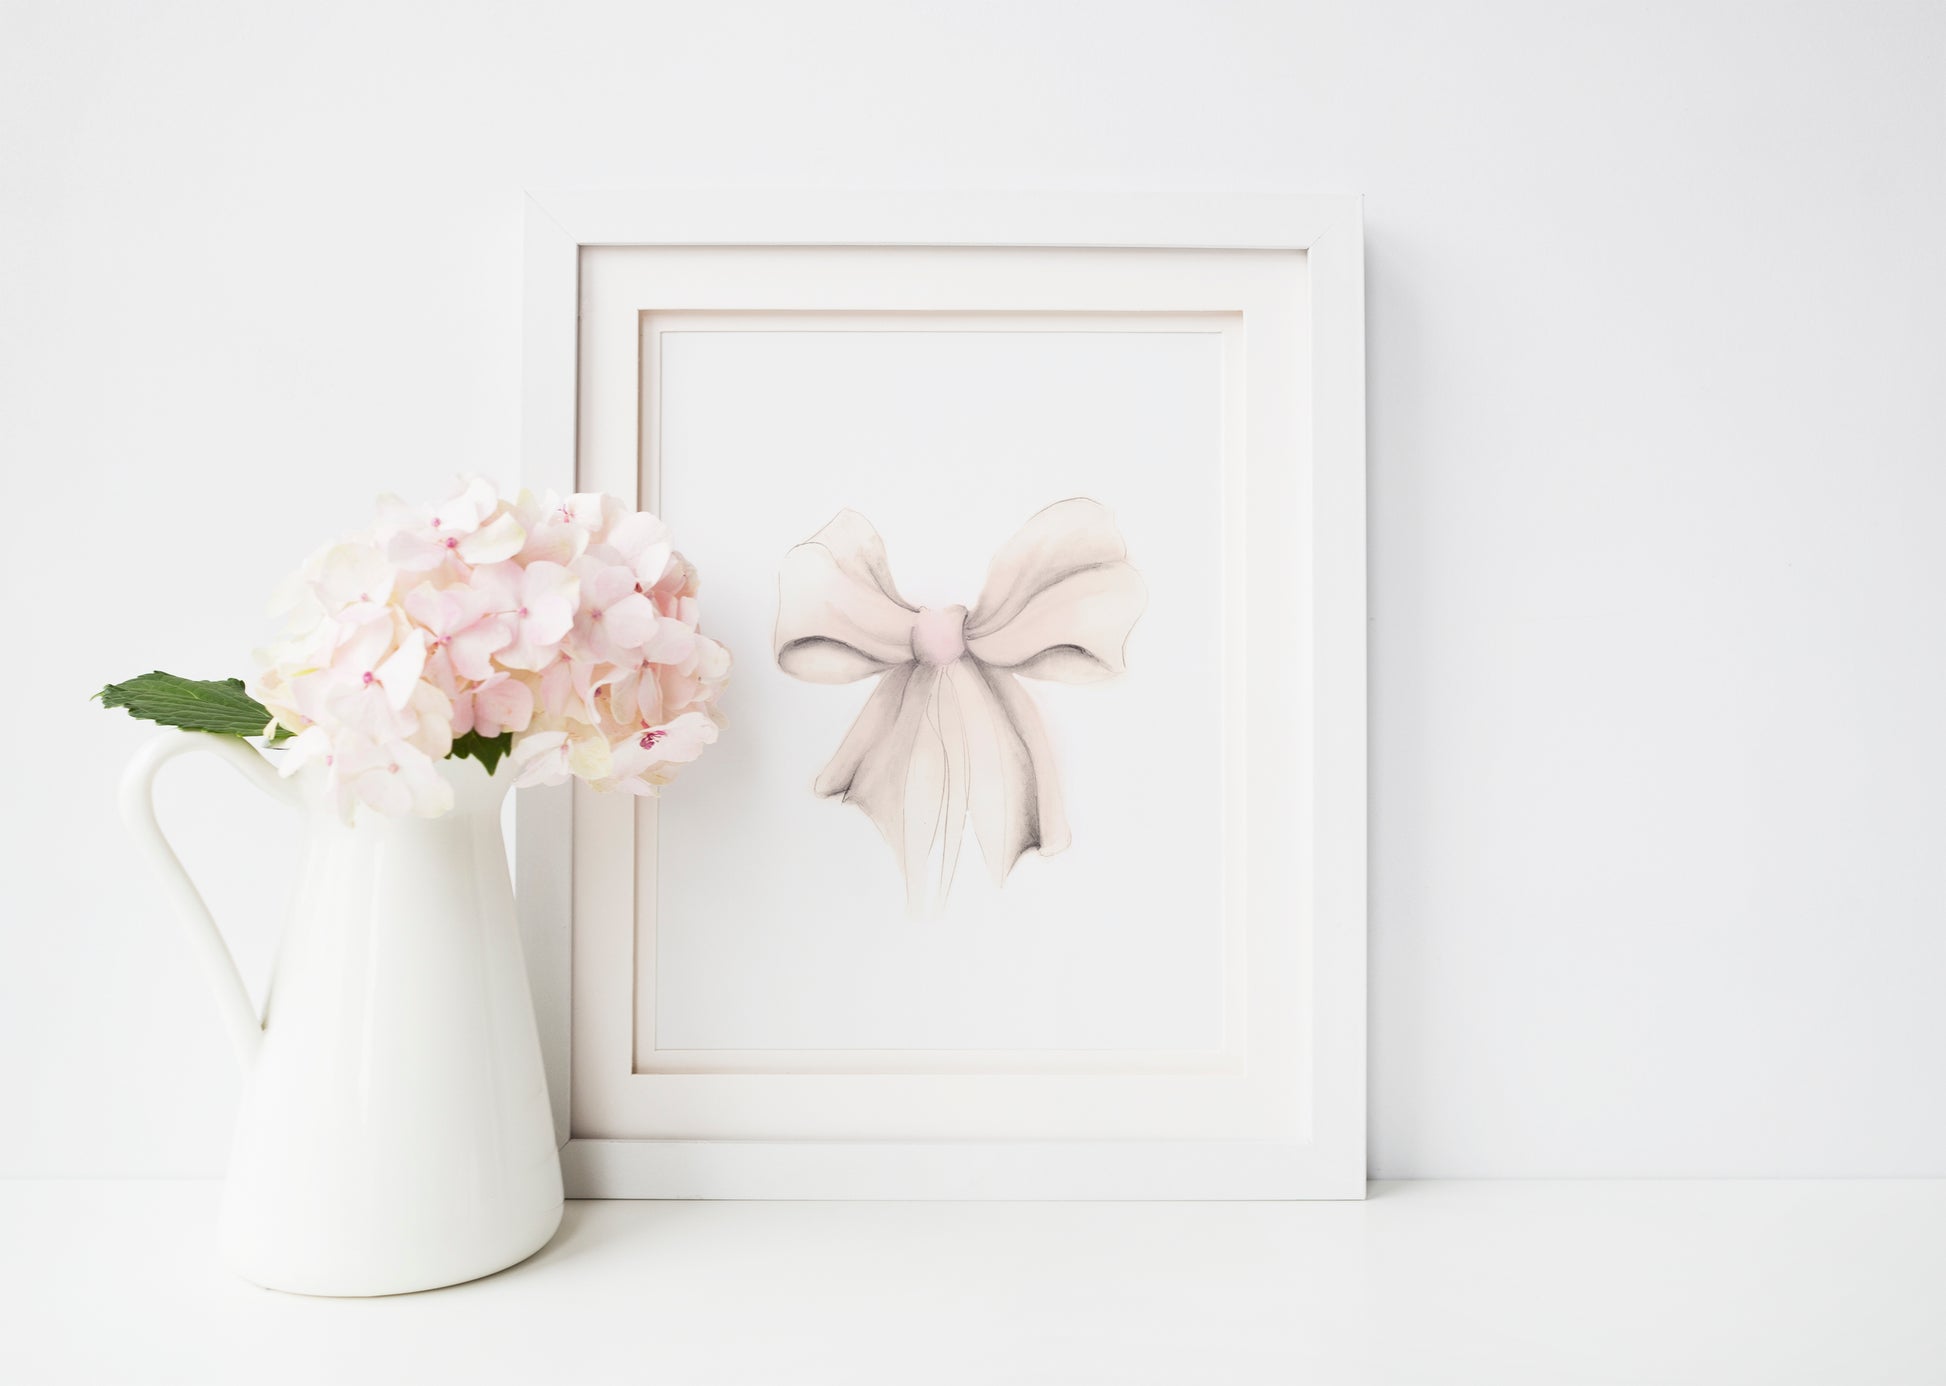 Sketch of a bow in tones of pink and sepia beige. The bow is on a plain white background and is framed in a wood frame that sits on a wood floor - Studio Q - Art by Nicky Quartermaine Scott